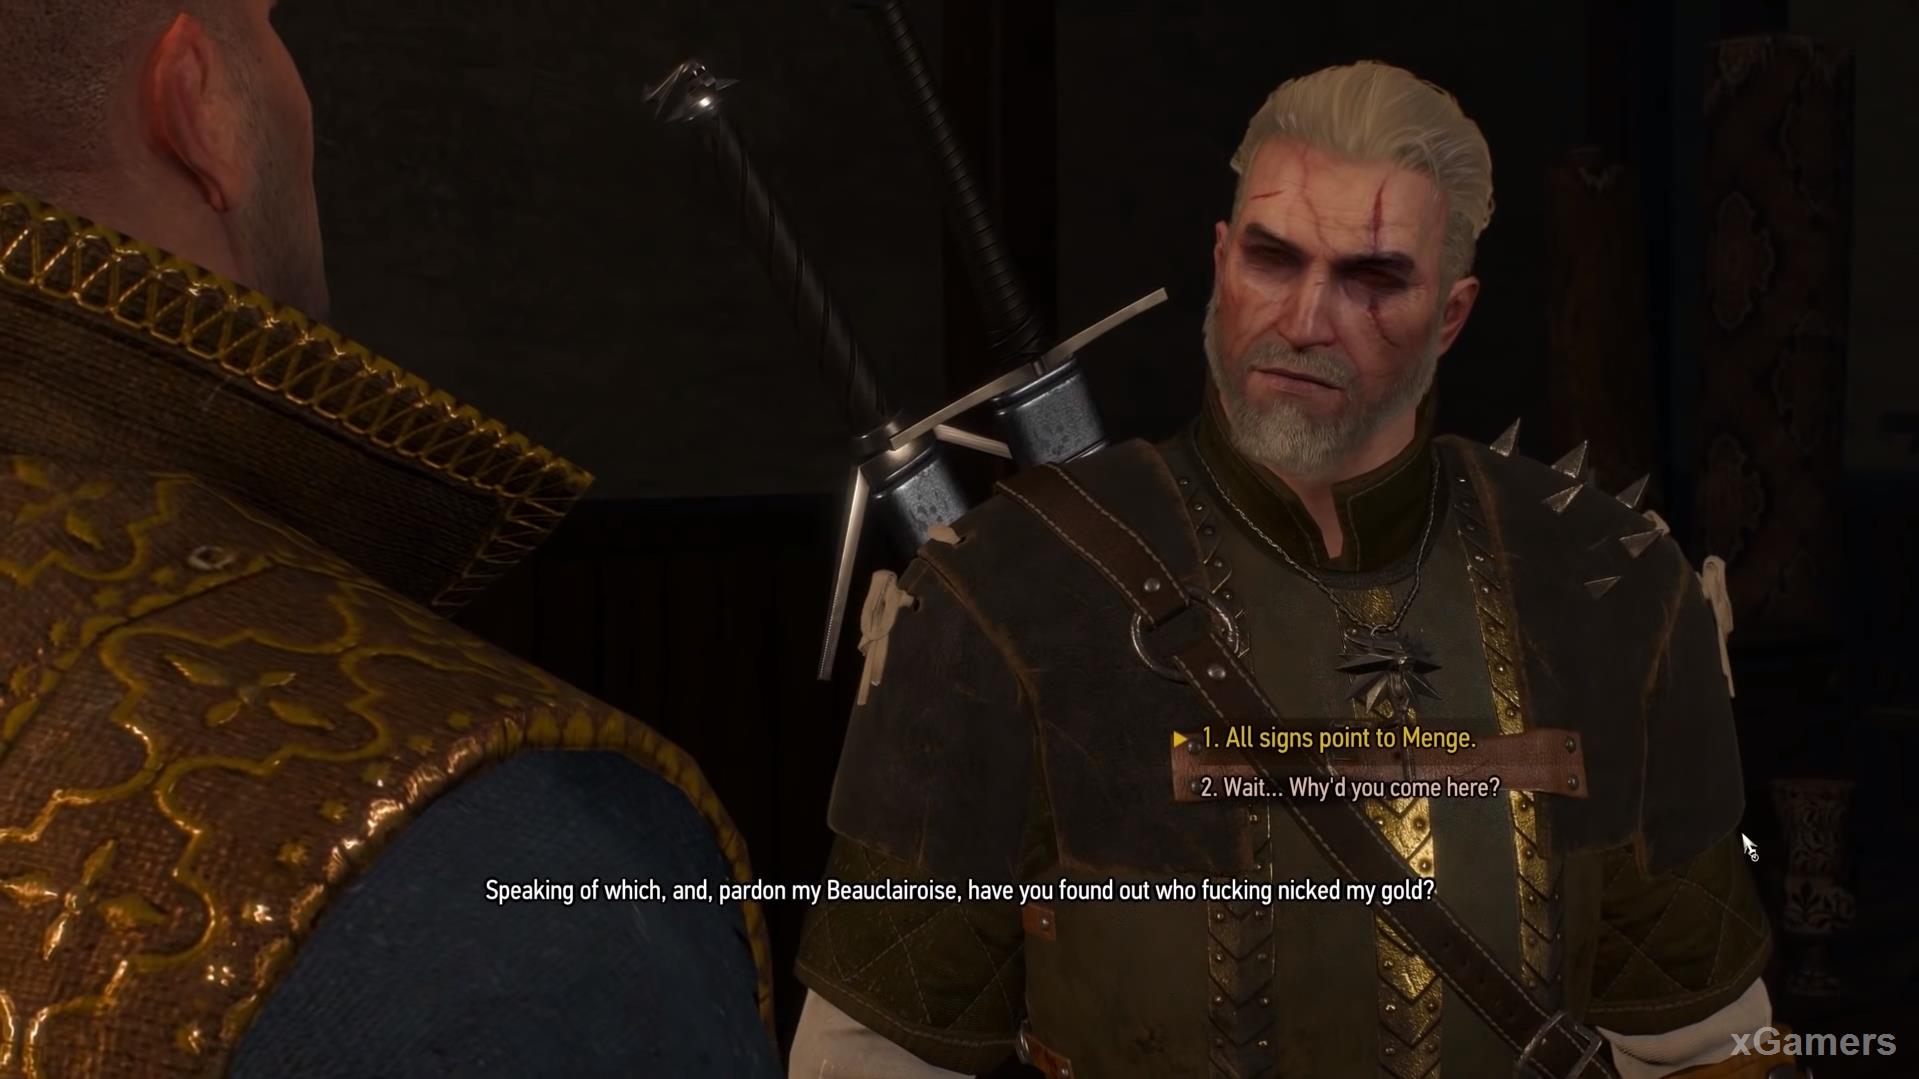 Dijkstra guesses about the mutual feelings of Geralt and Triss